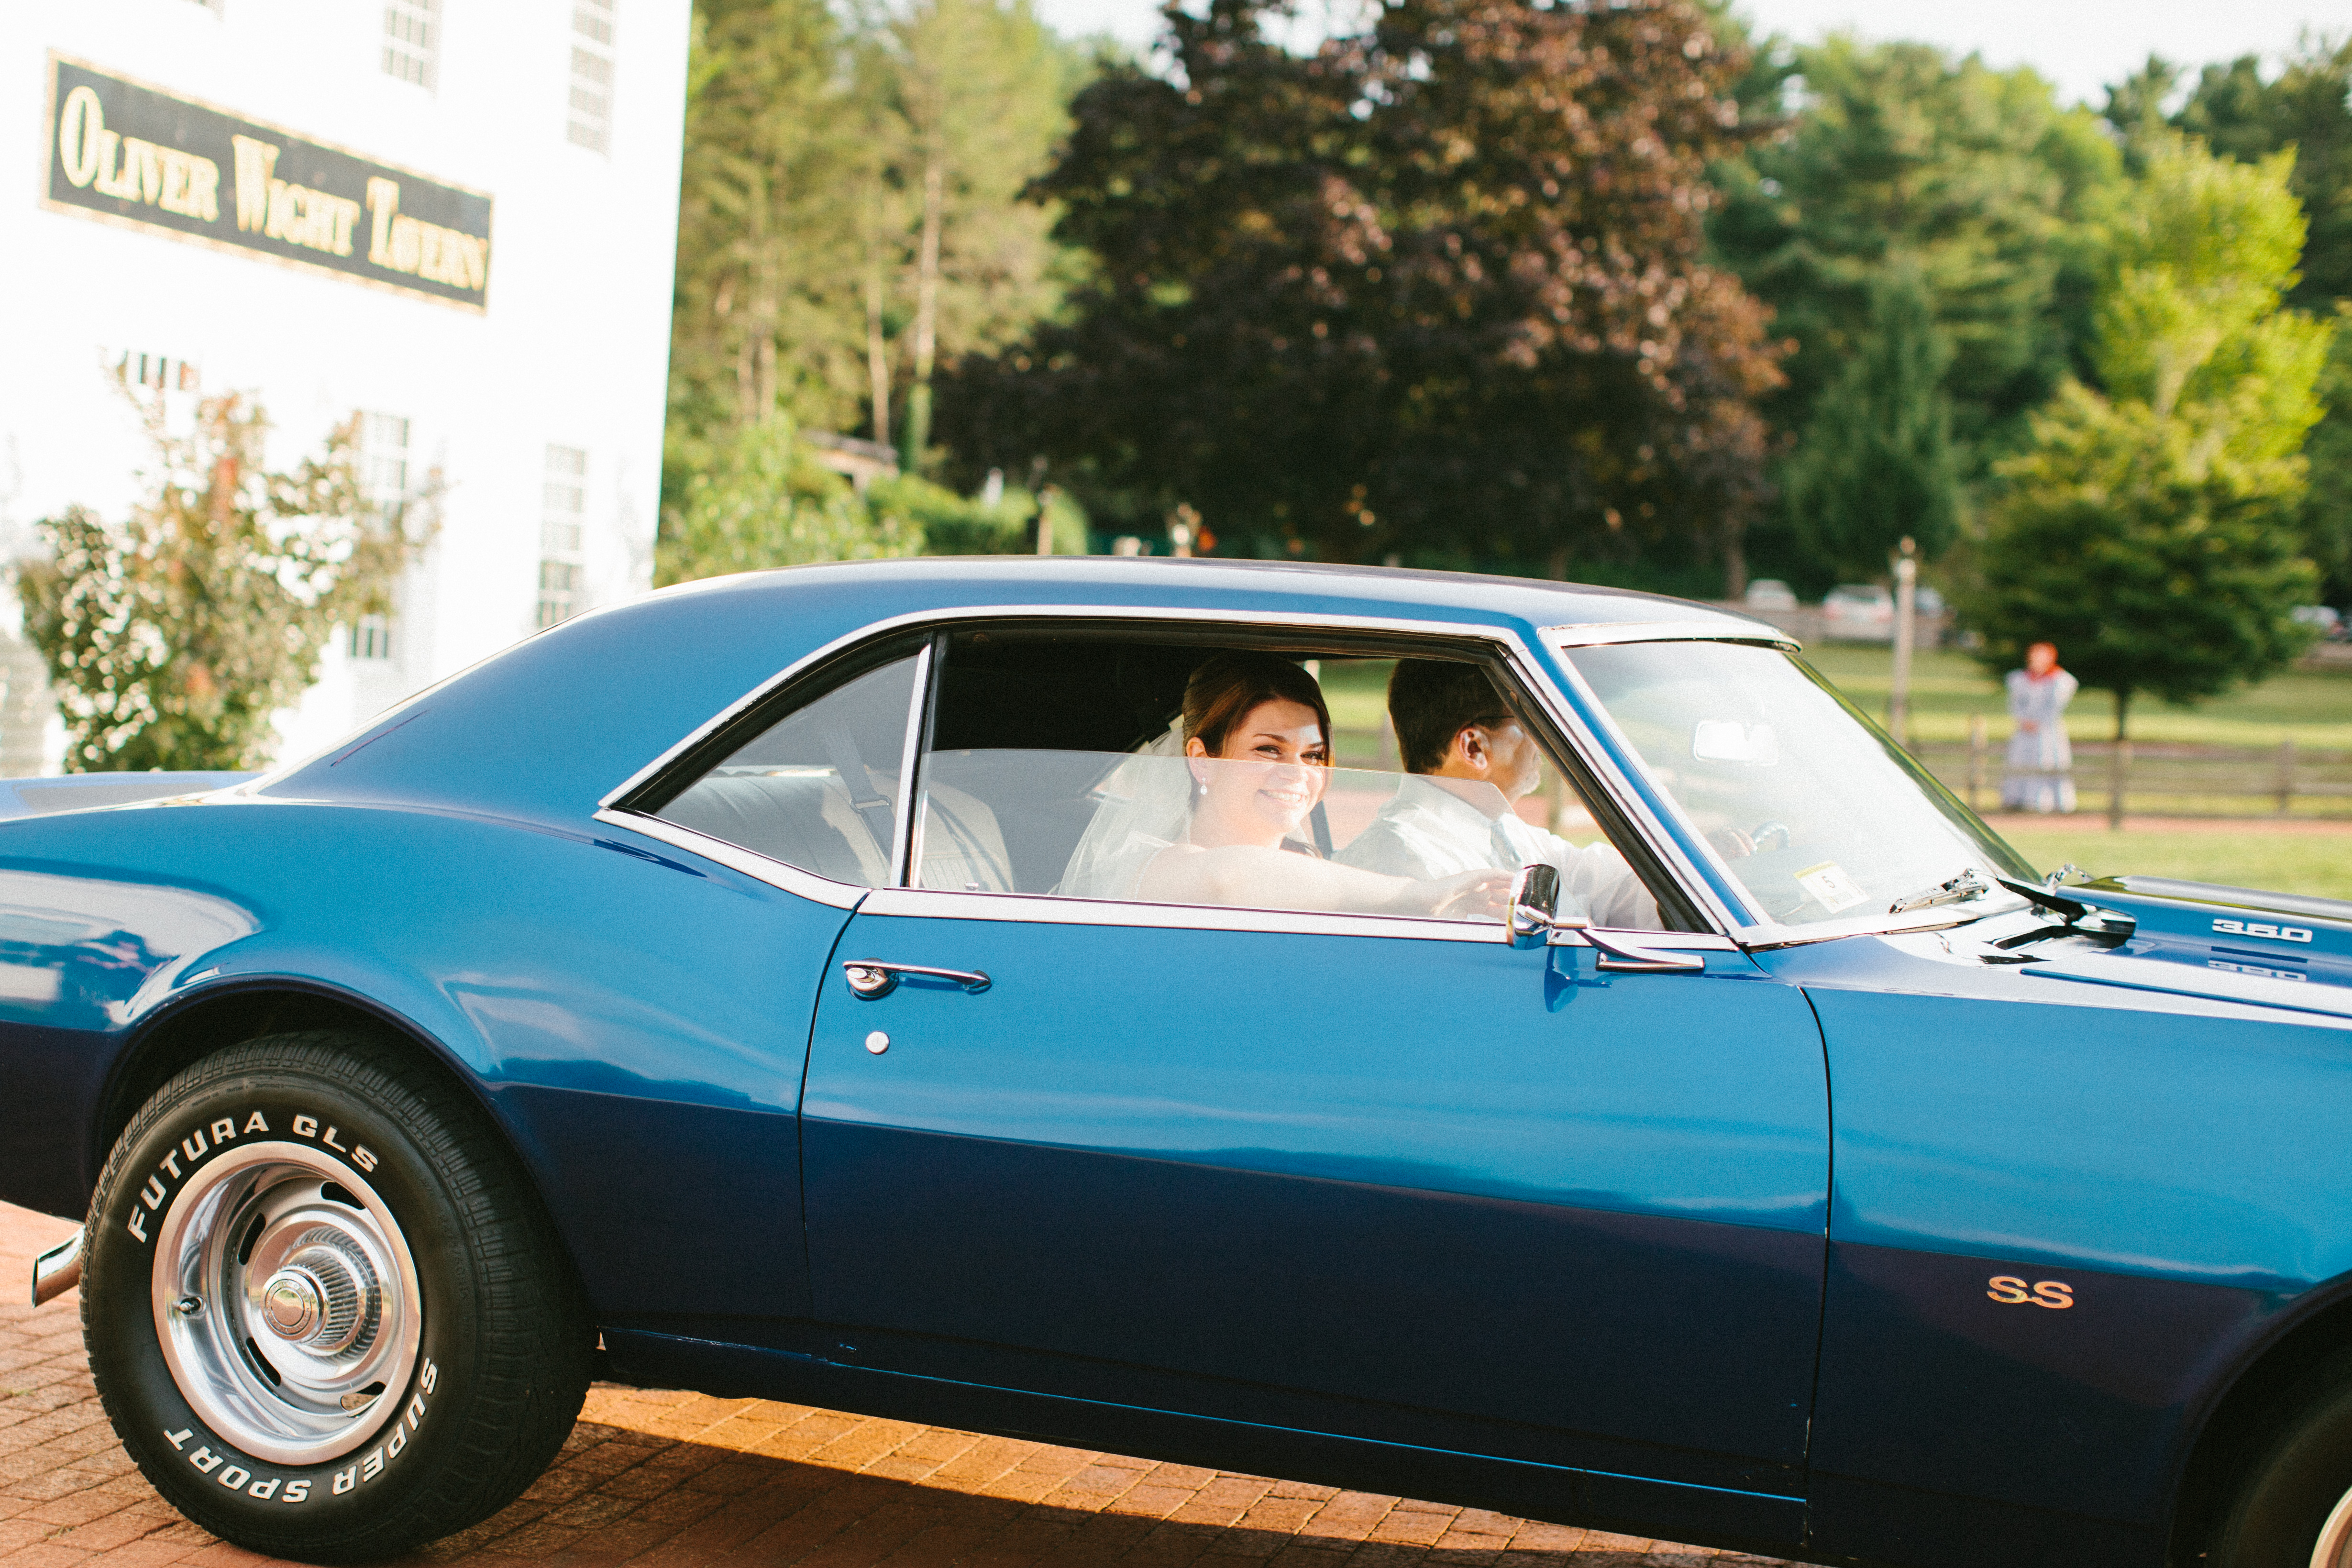 Bride arrives at her wedding in a classic blue mustang